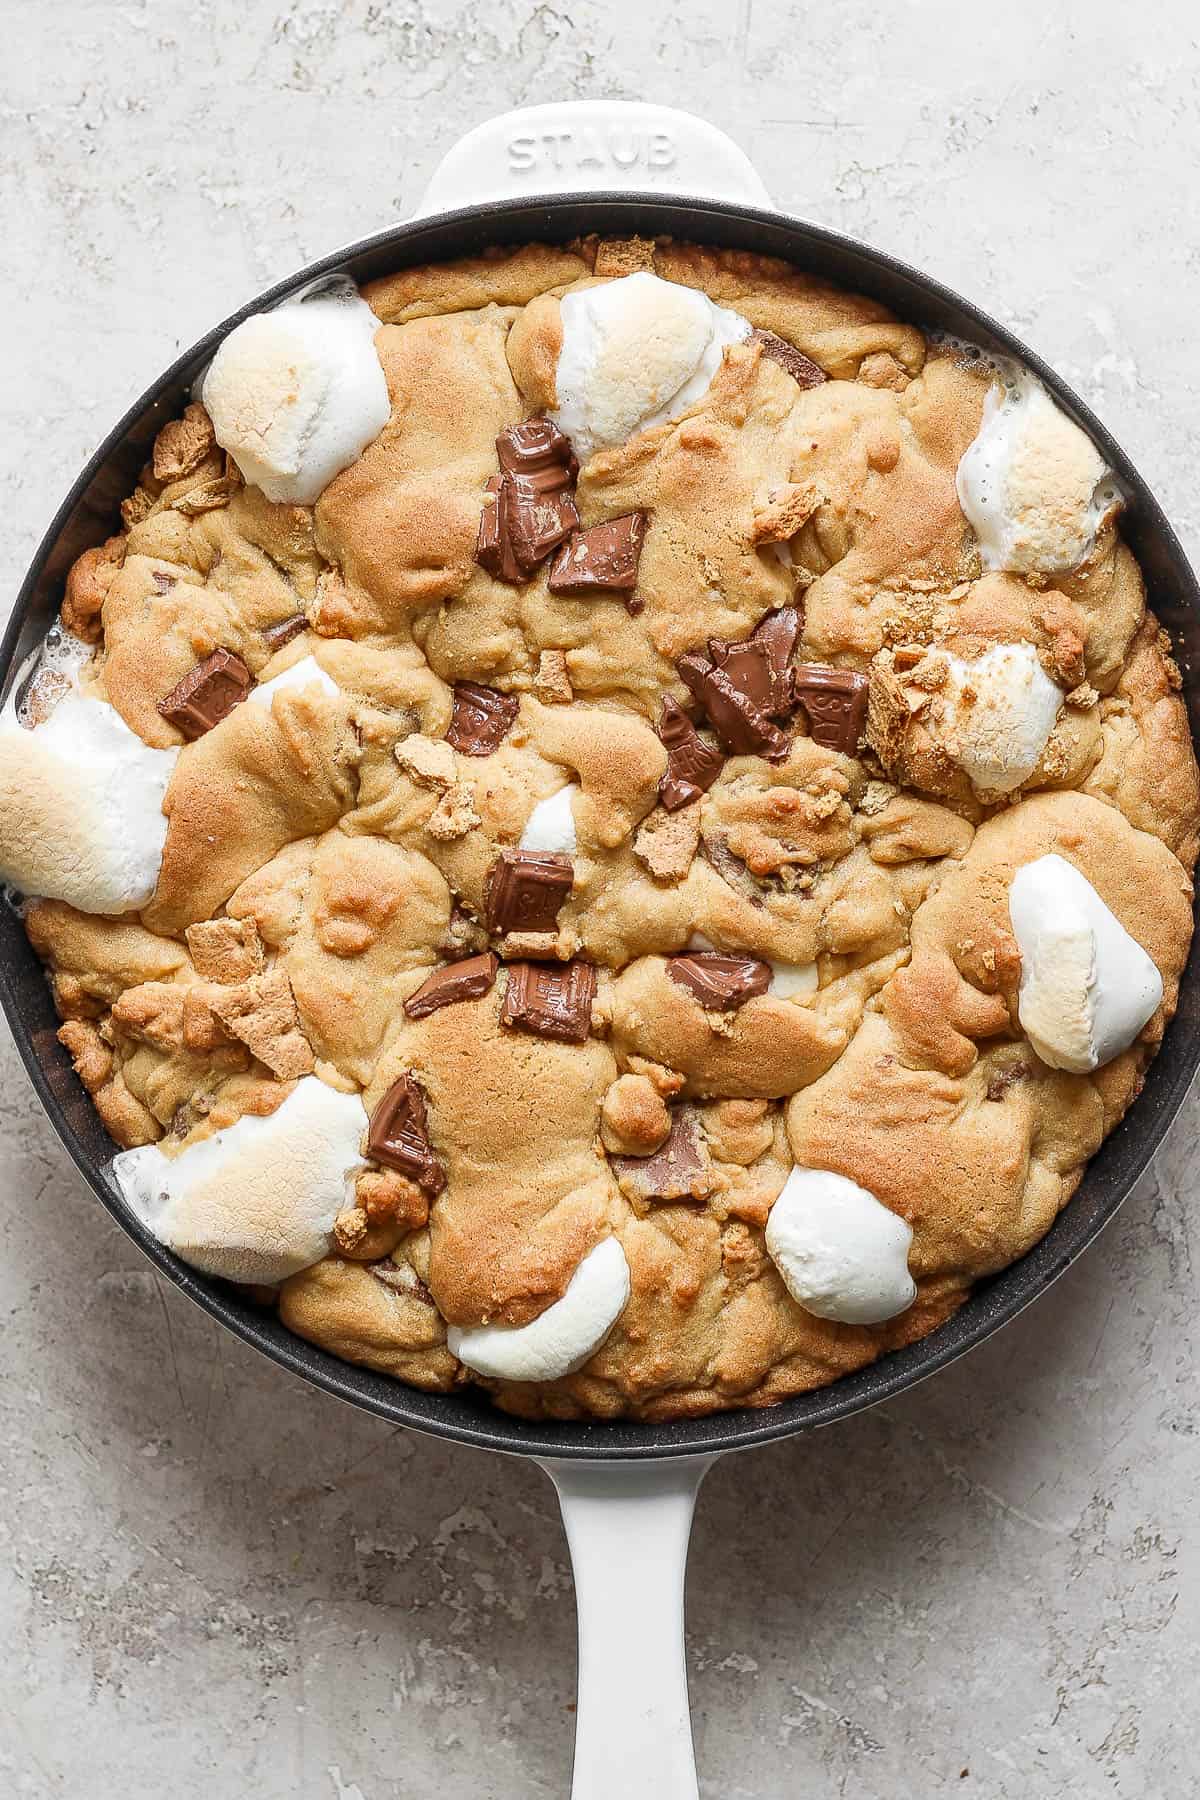 A fully baked s'more cookie skillet.